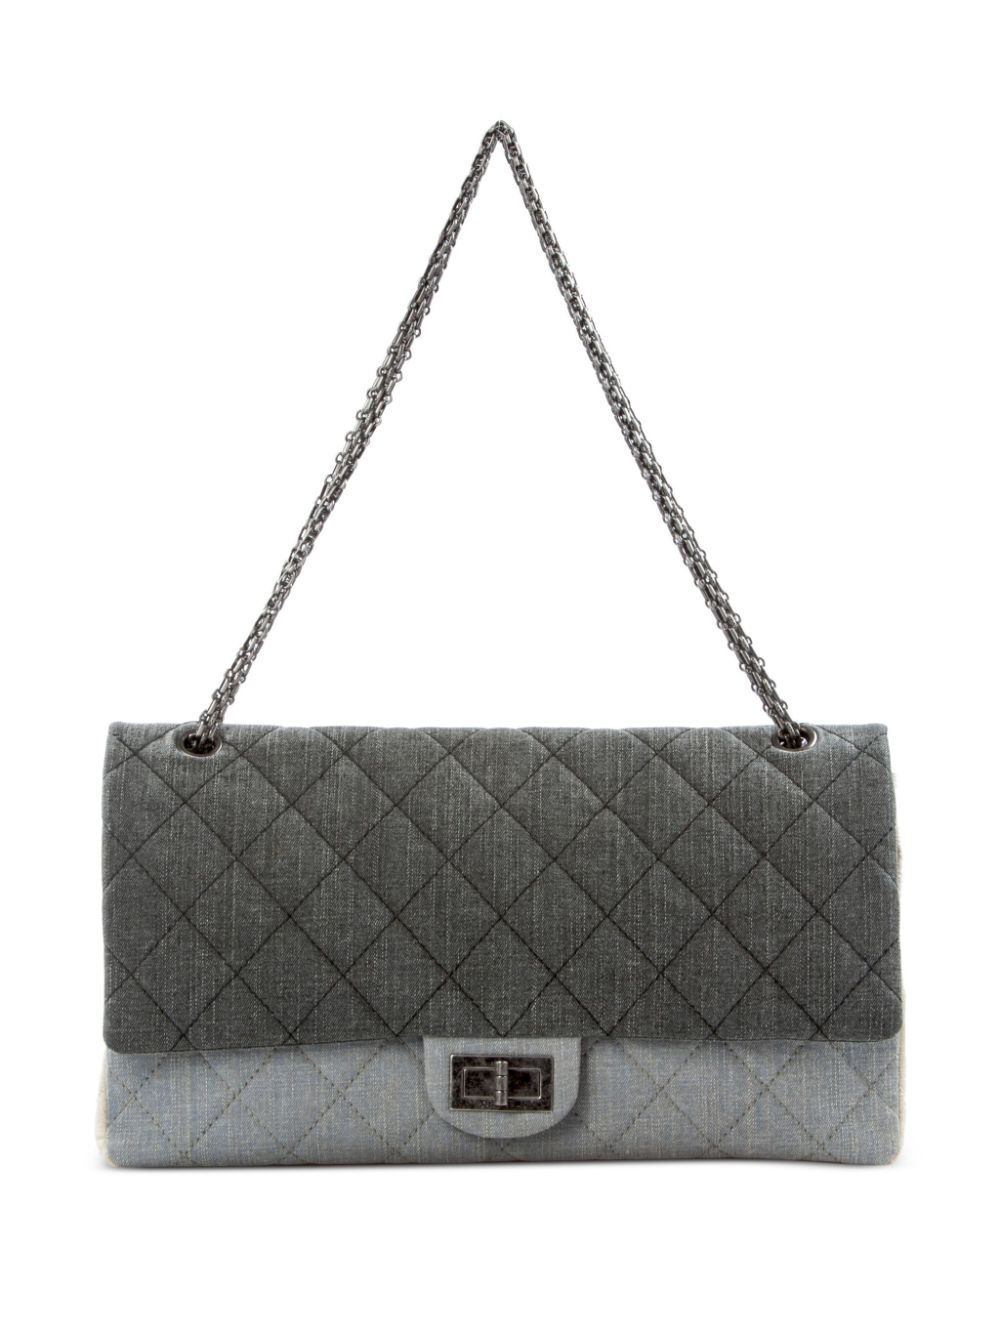 CHANEL Pre-Owned 2009 large 2.55 Reissue shoulder bag - Grey von CHANEL Pre-Owned